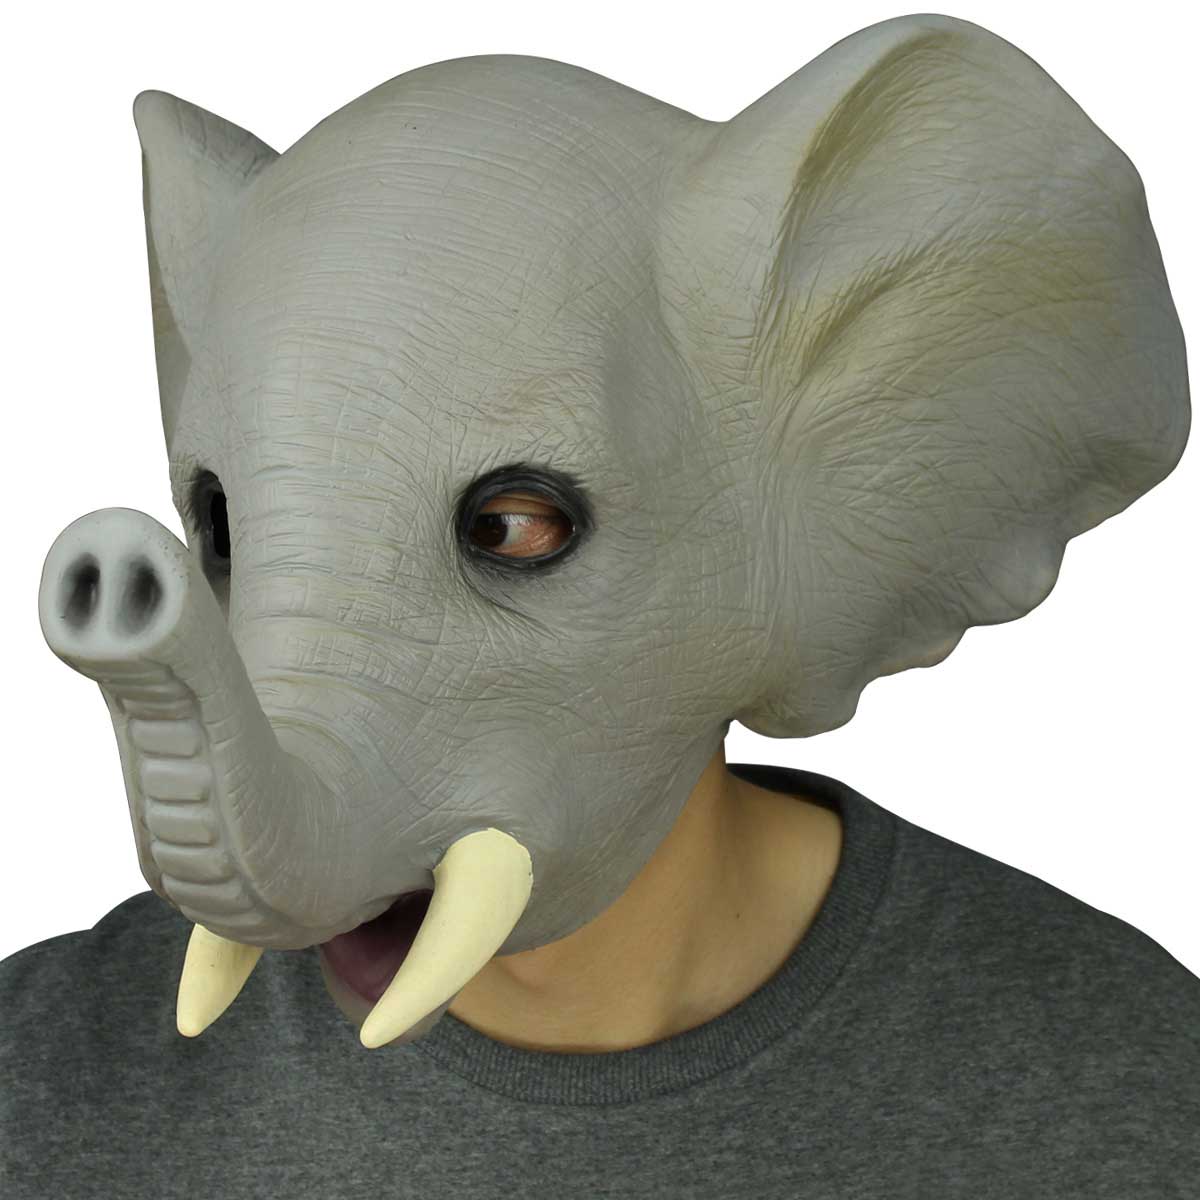 deluxe Nouveauté Latex Creepy Elephant Costume chef Masque Halloween Cosplay Party mascarade Props décorations gris